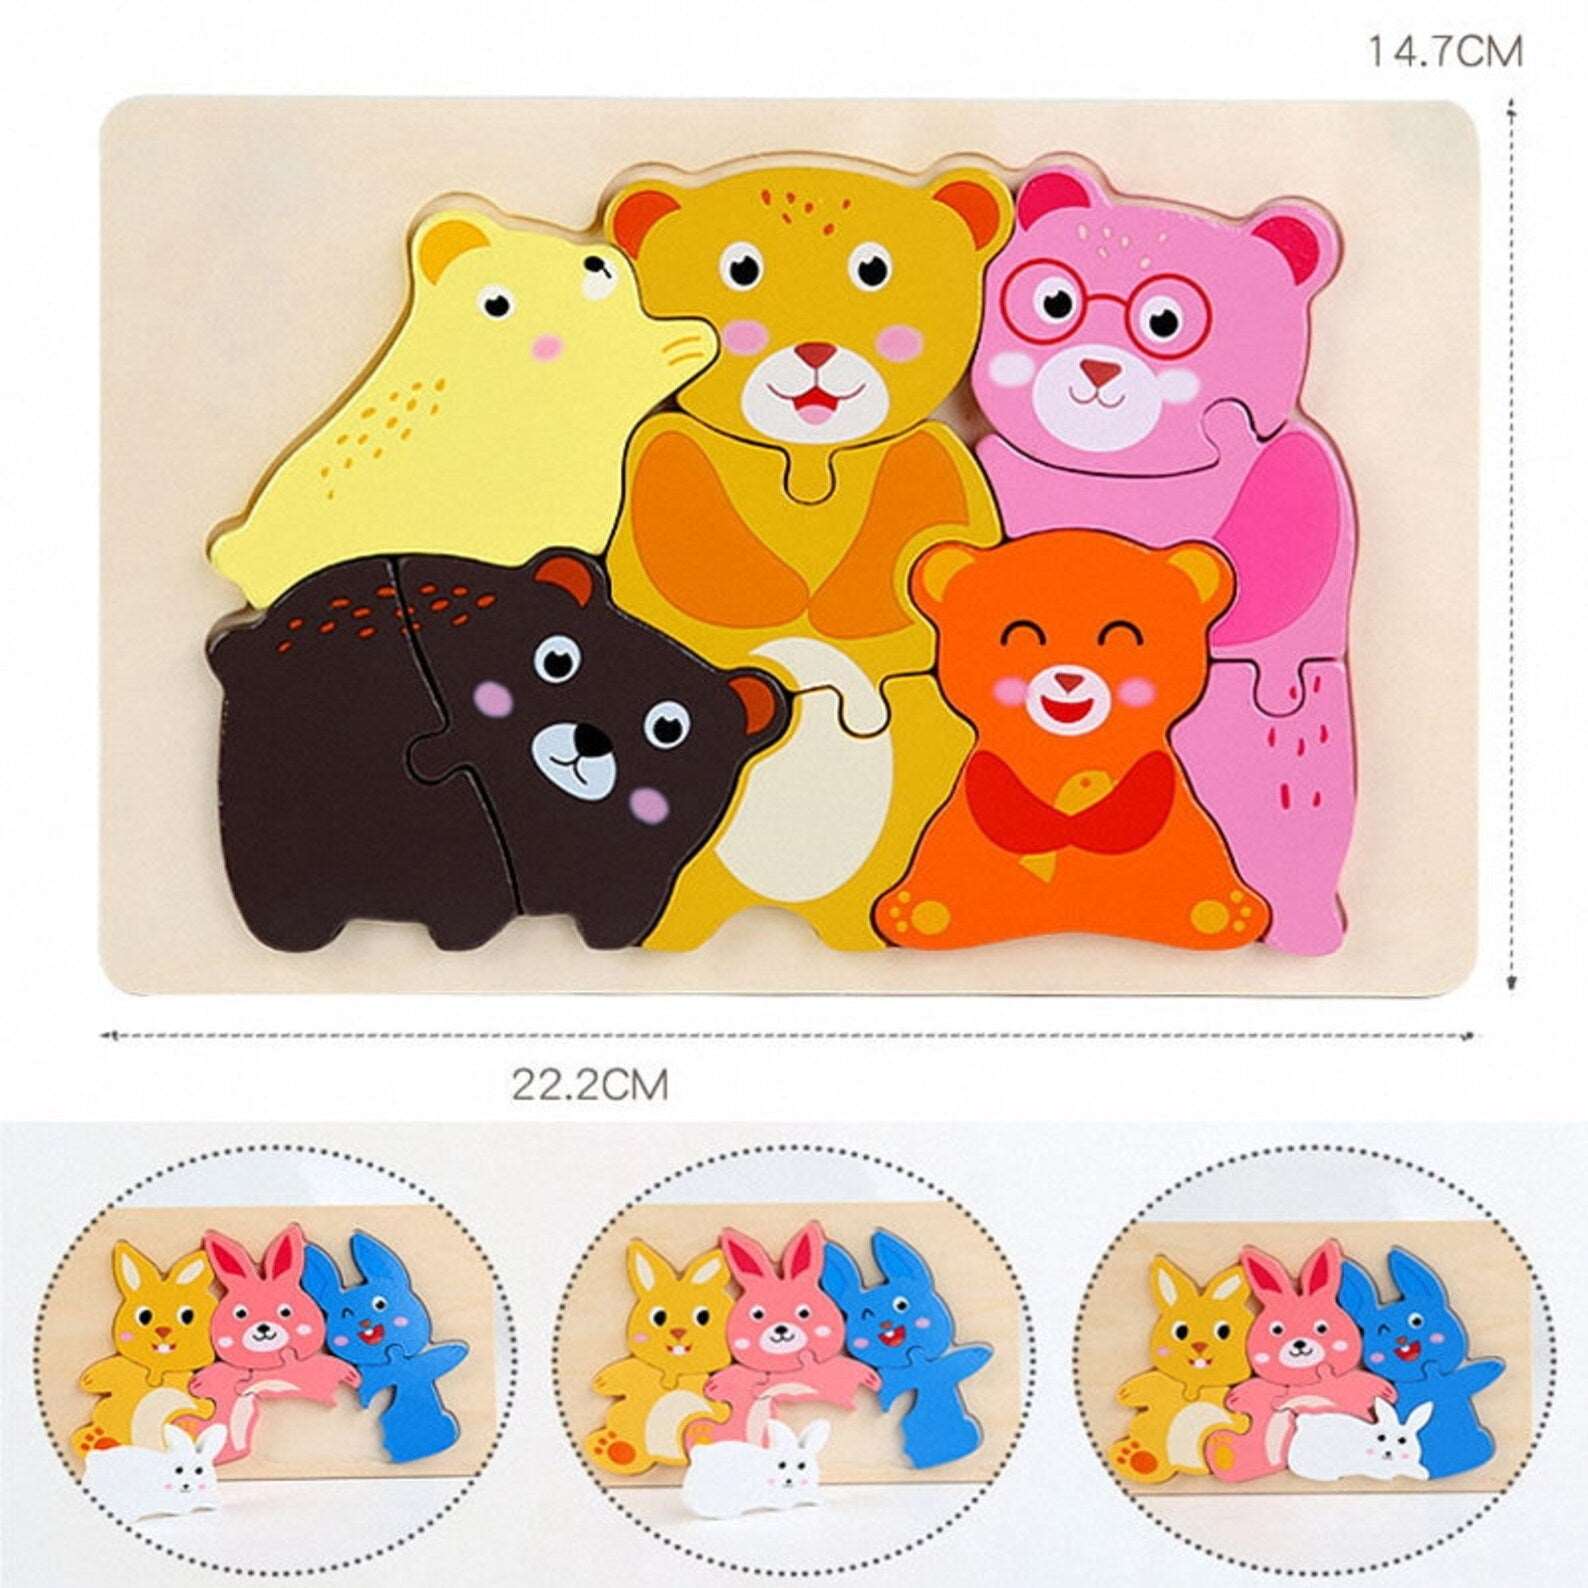 Toddler Wooden Puzzles - Wooden Animal Puzzles For Toddlers